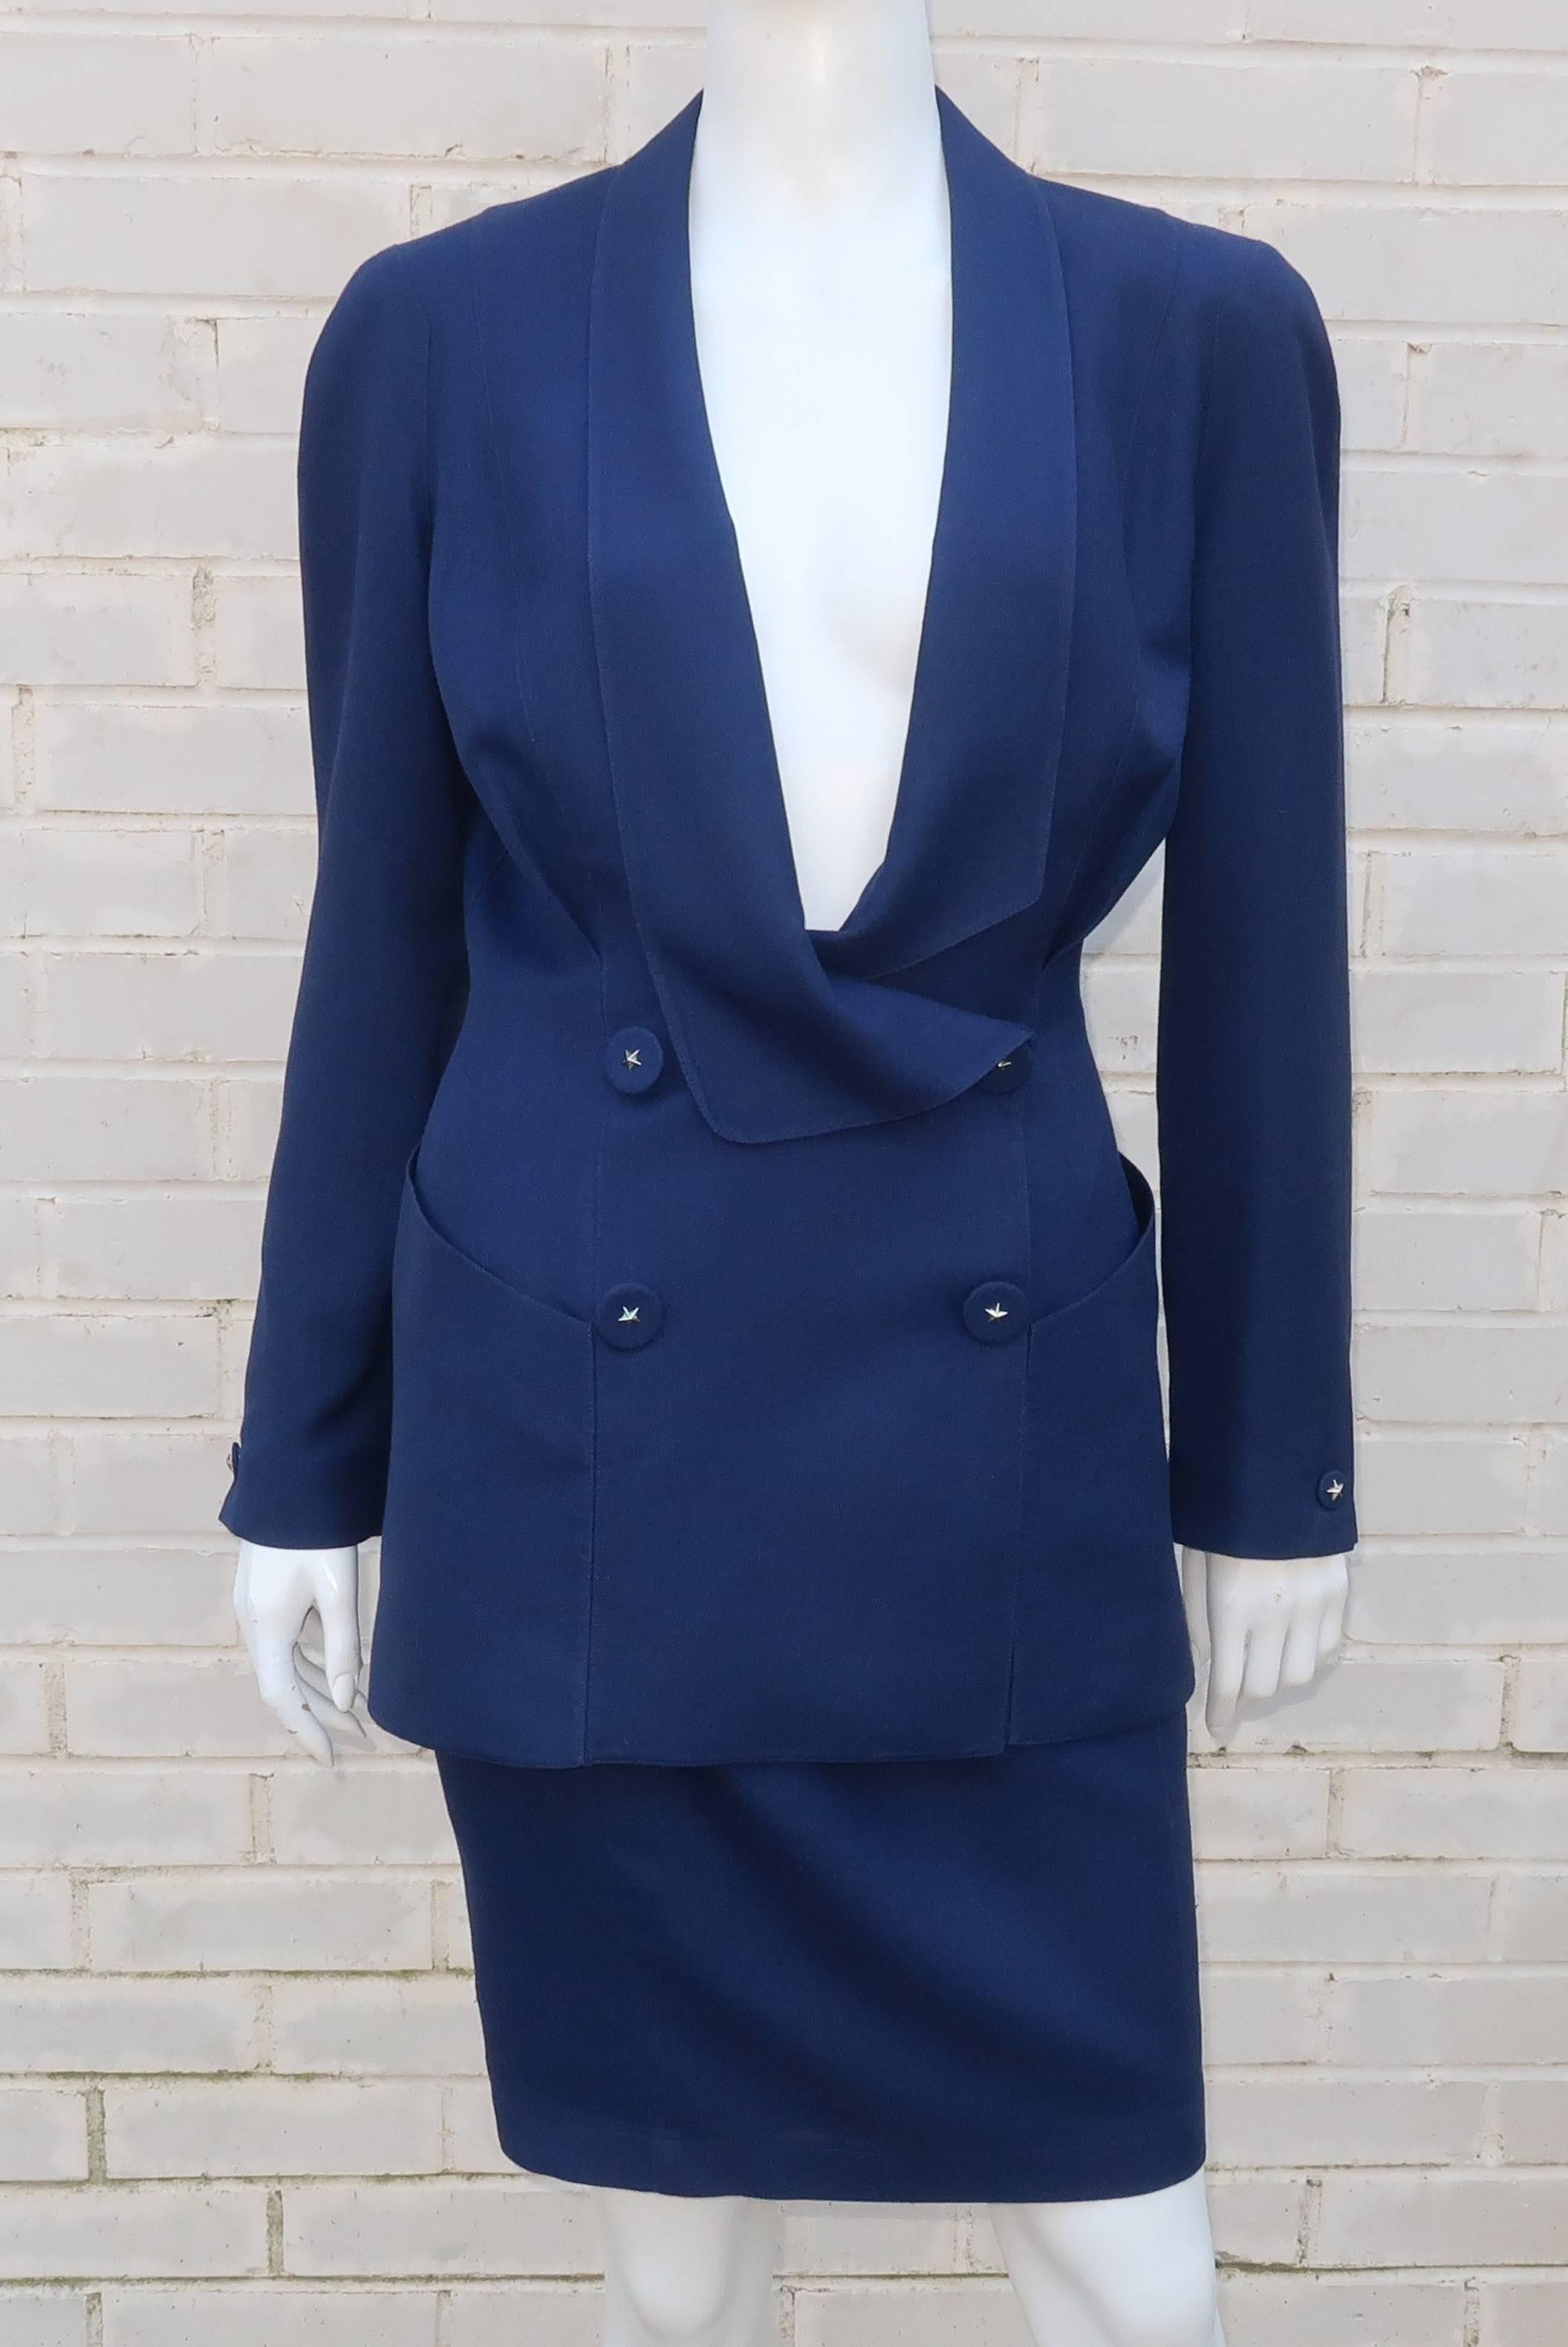 As with many of Thierry Mugler's designs, this 1980's linen suit is an inspired combination of a futuristic style with a nod to the strong silhouettes of the 1940's.  The shawl collared jacket has a softness to the shoulder line created by expert